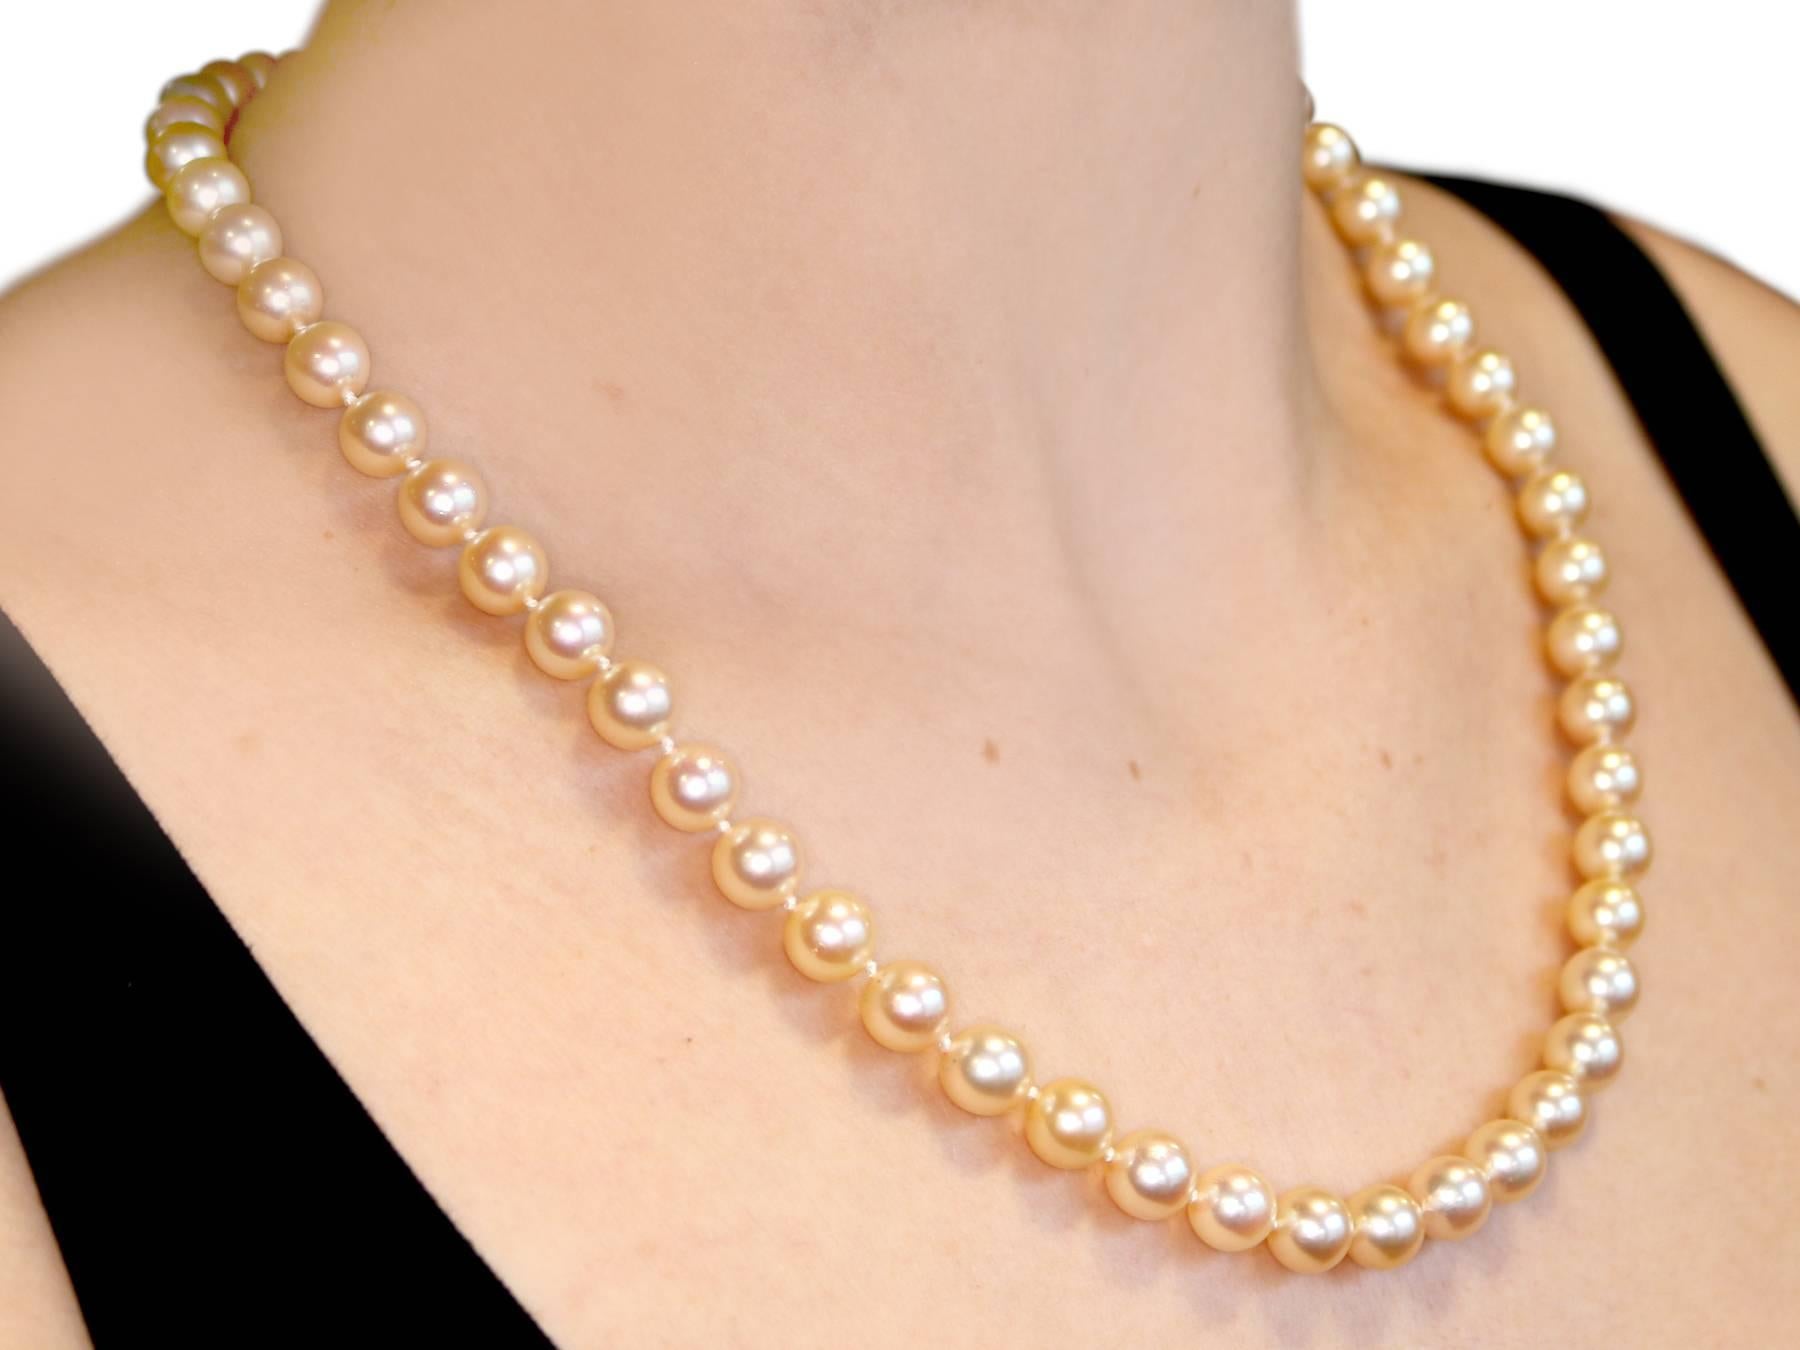 Vintage 1980s Single Strand Cultured Pearl Necklace Yellow Gold Clasp For Sale 3